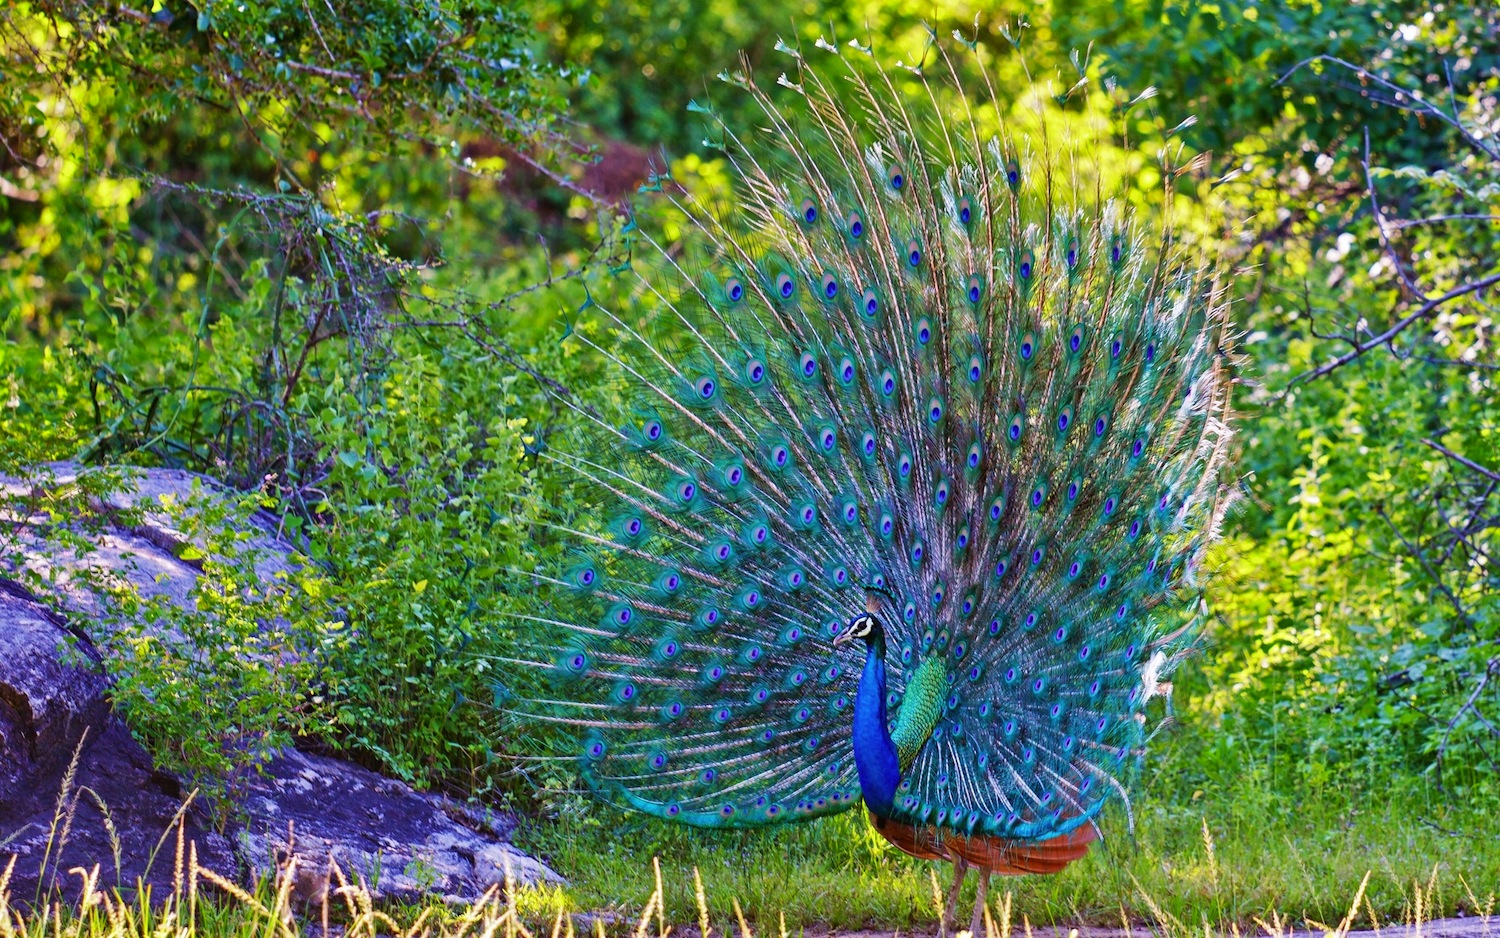 Dolly's Proud Peacocks — A Little-Known Faulkner Legacy